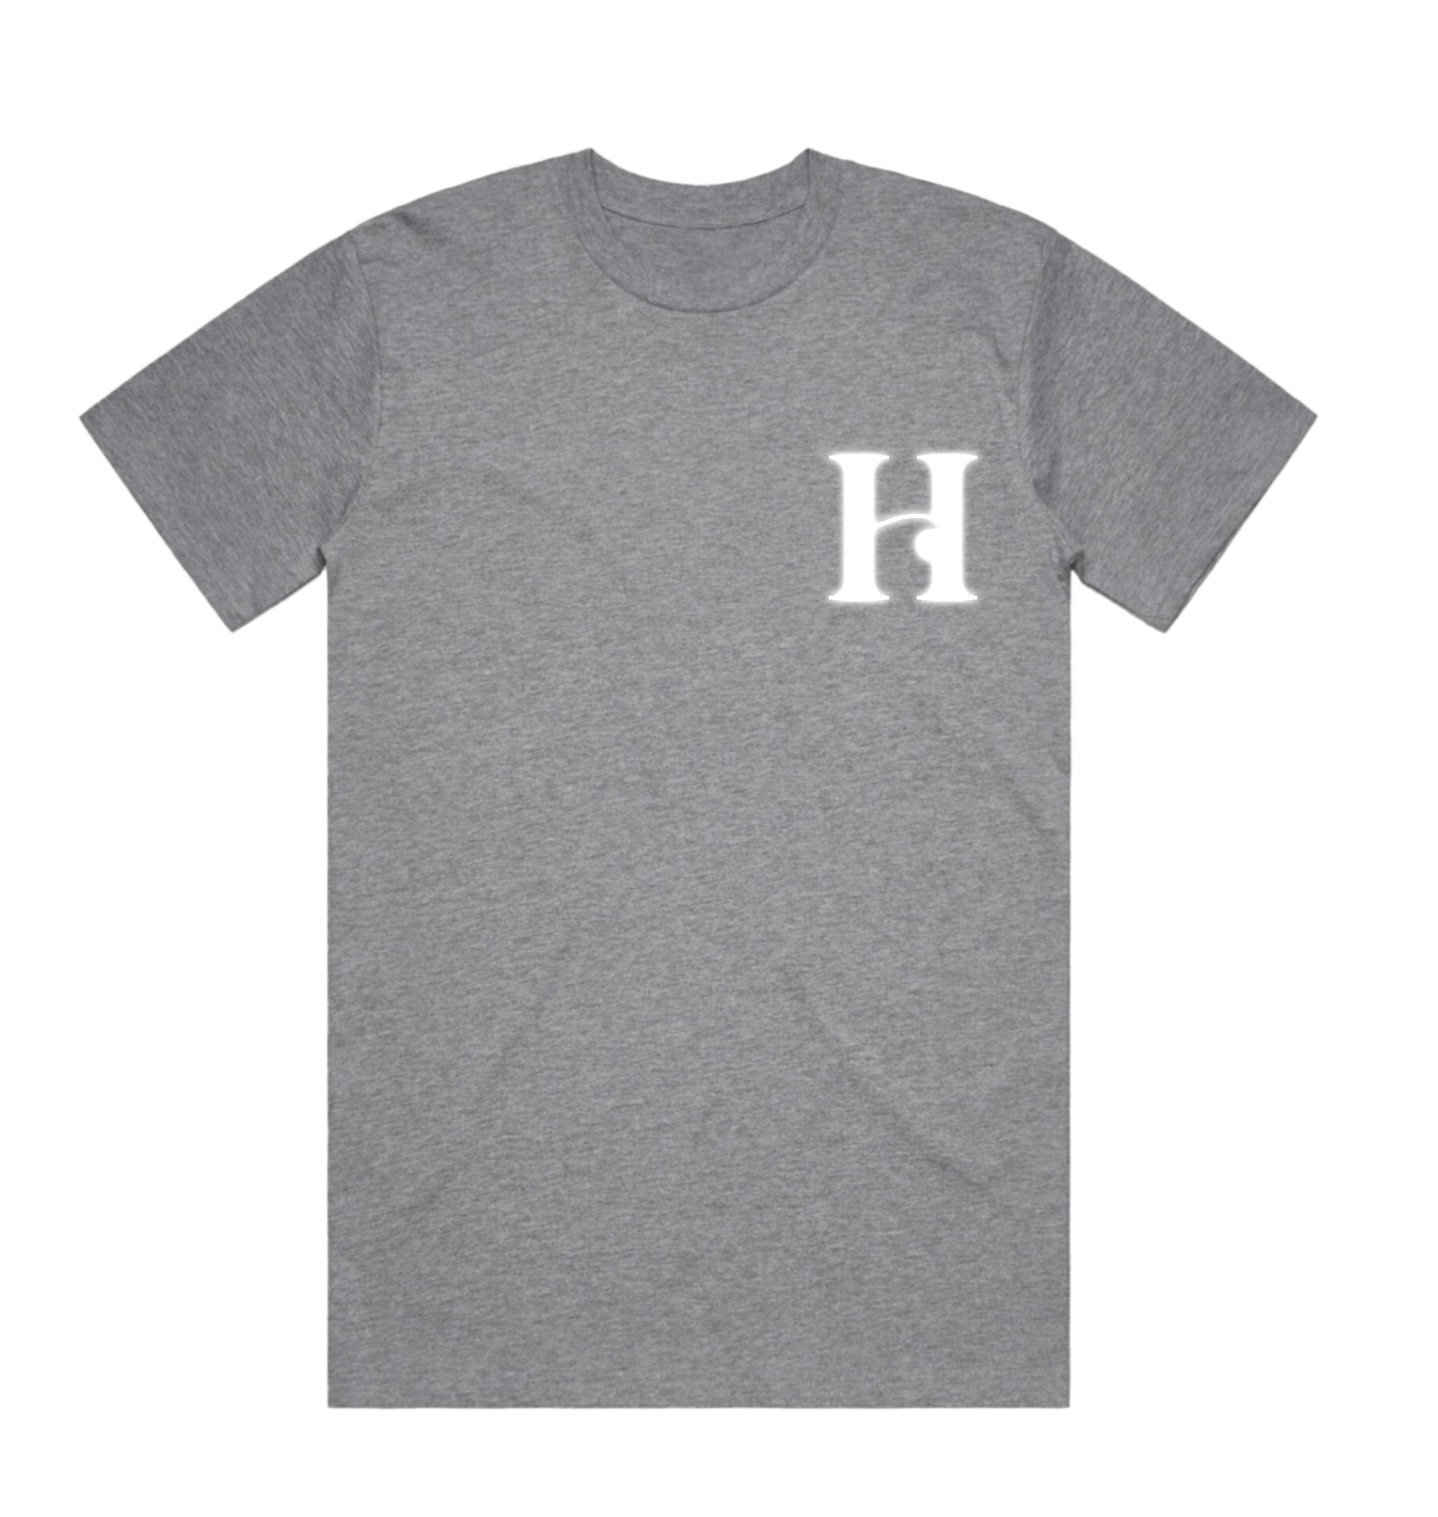 Reflective Summer of Champions Tee in Gray